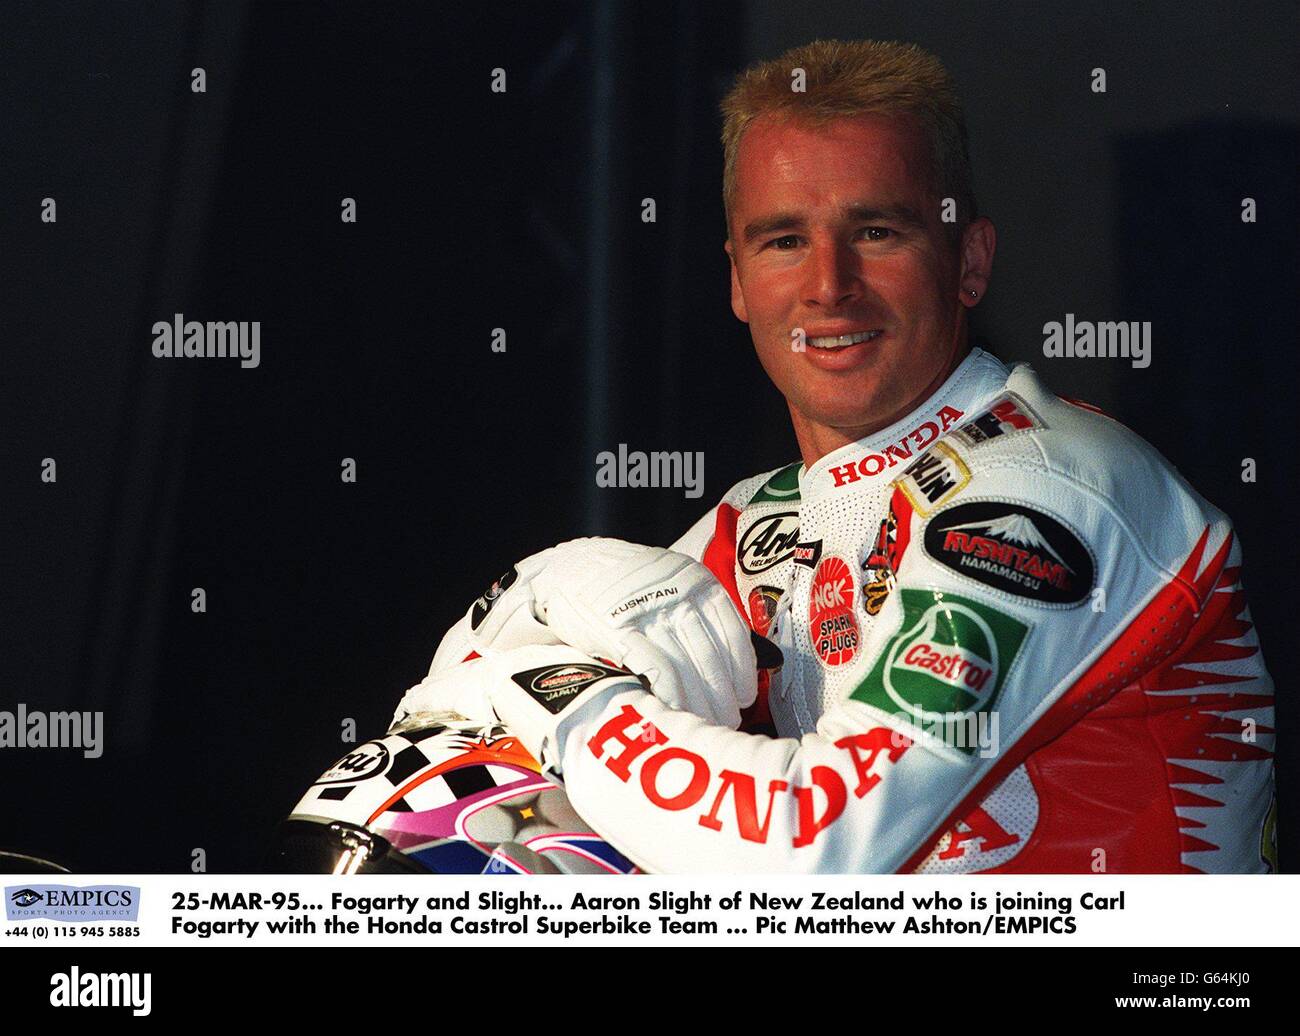 25-MAR-95. Fogarty and Slight. Aaron Slight of New Zealand who is joining Carl Fogarty with the Honda Castrol Superbike Team Stock Photo